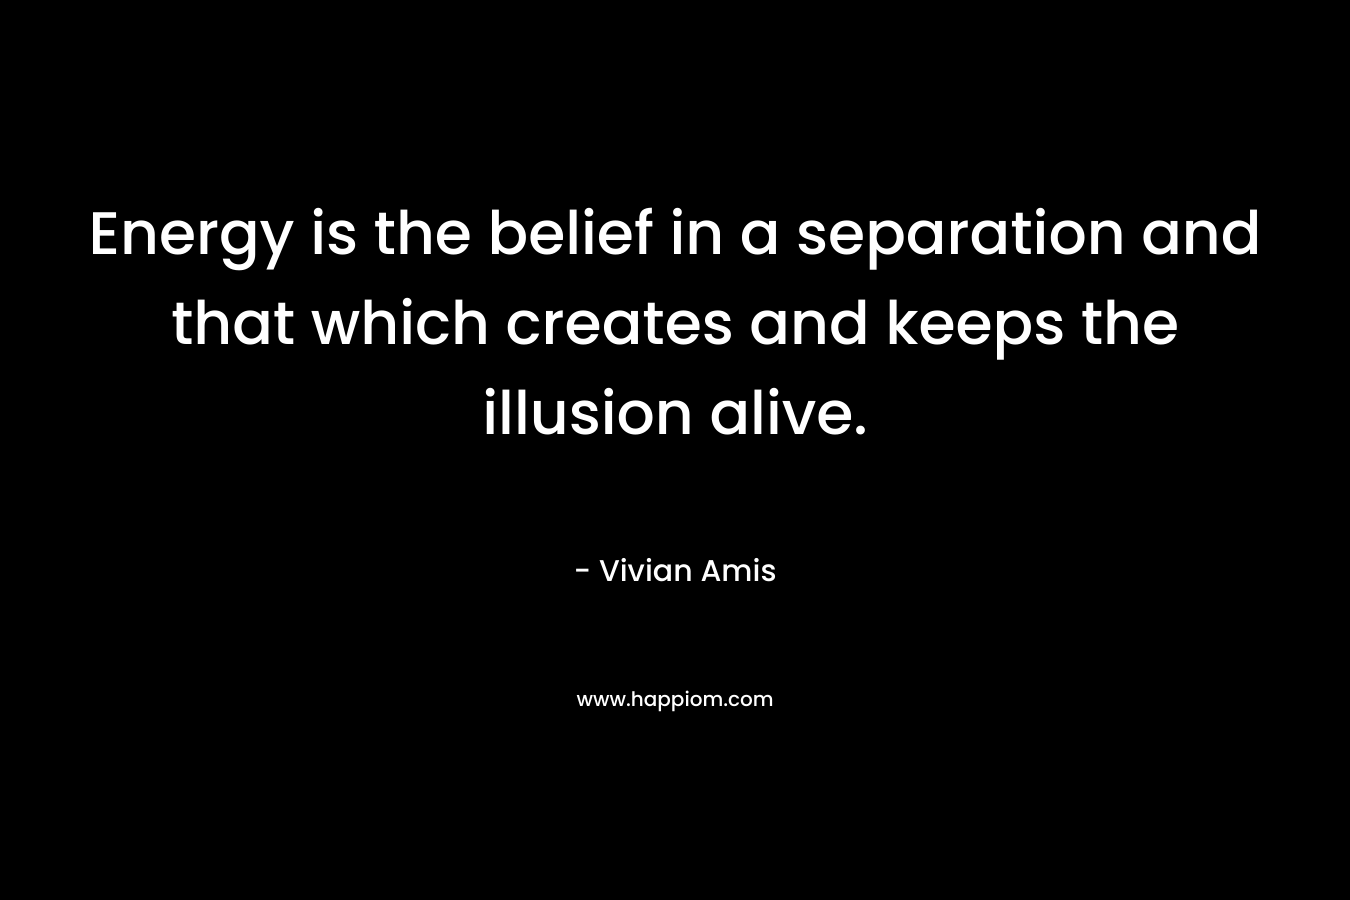 Energy is the belief in a separation and that which creates and keeps the illusion alive. – Vivian Amis